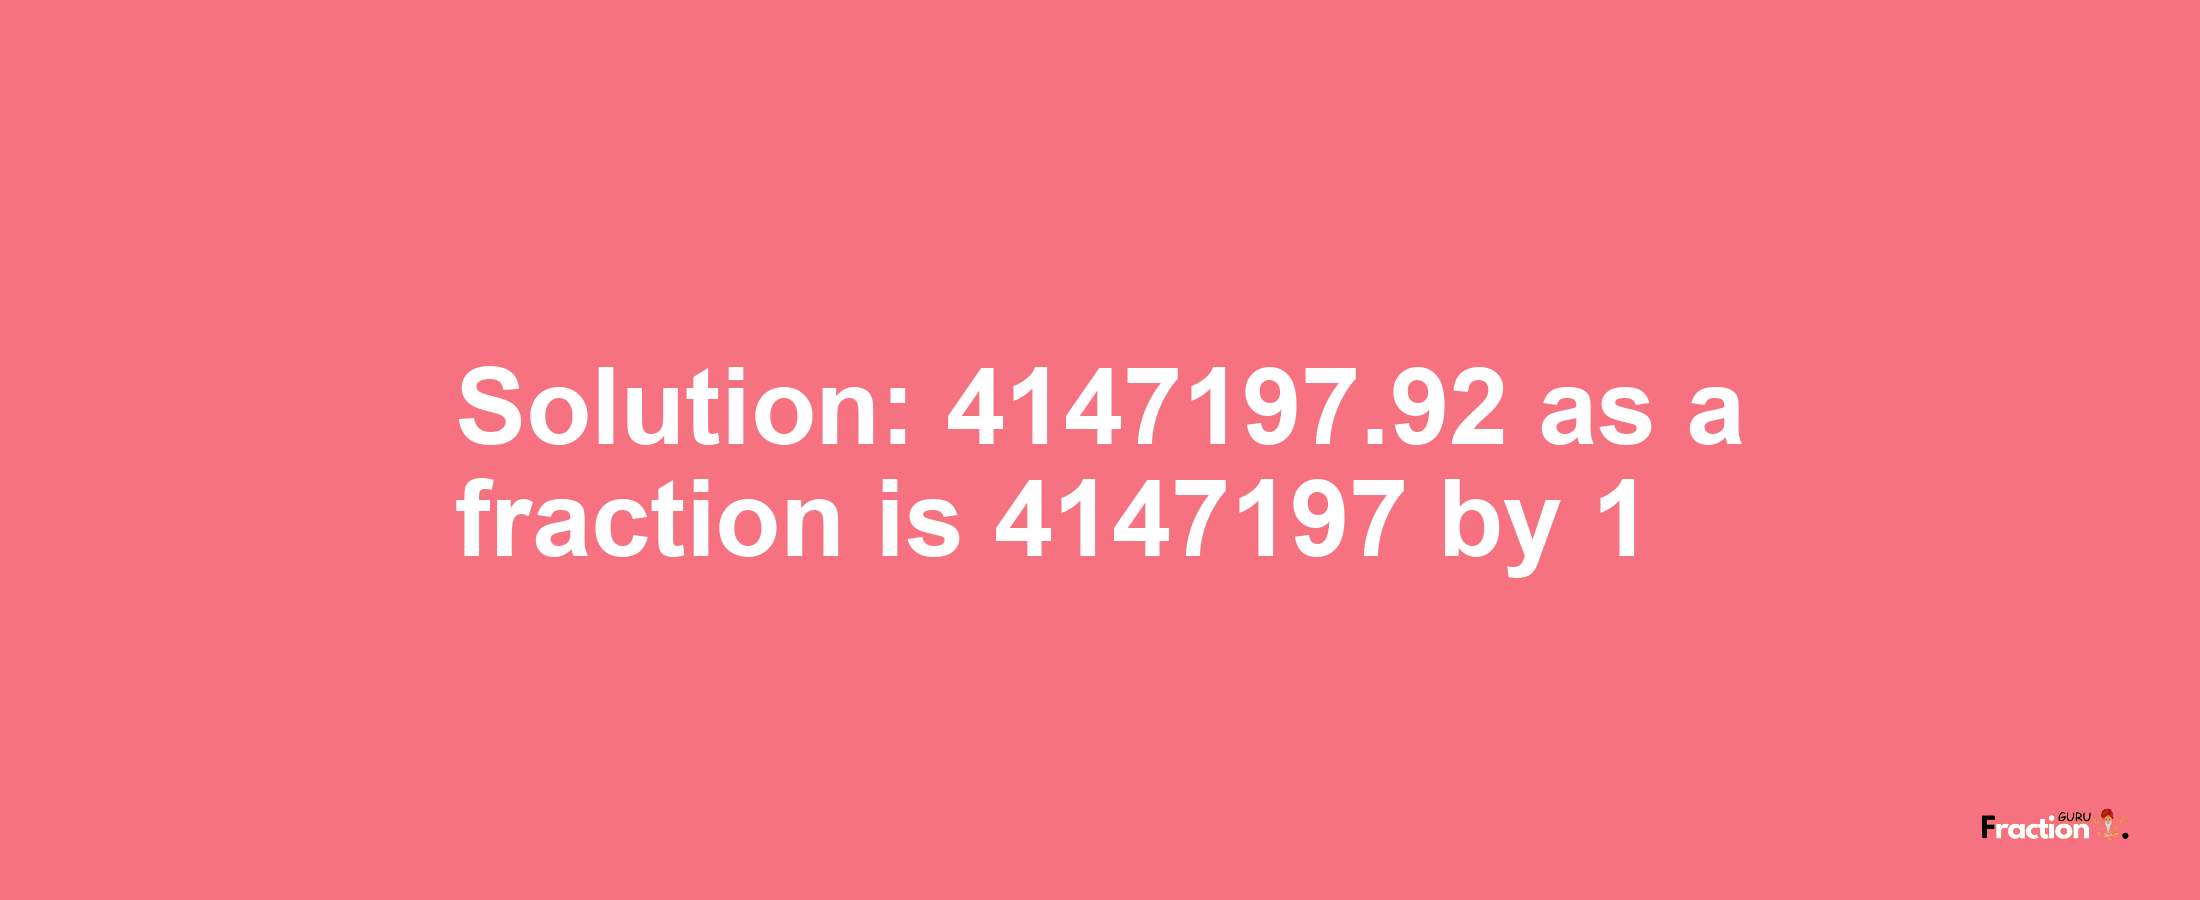 Solution:4147197.92 as a fraction is 4147197/1